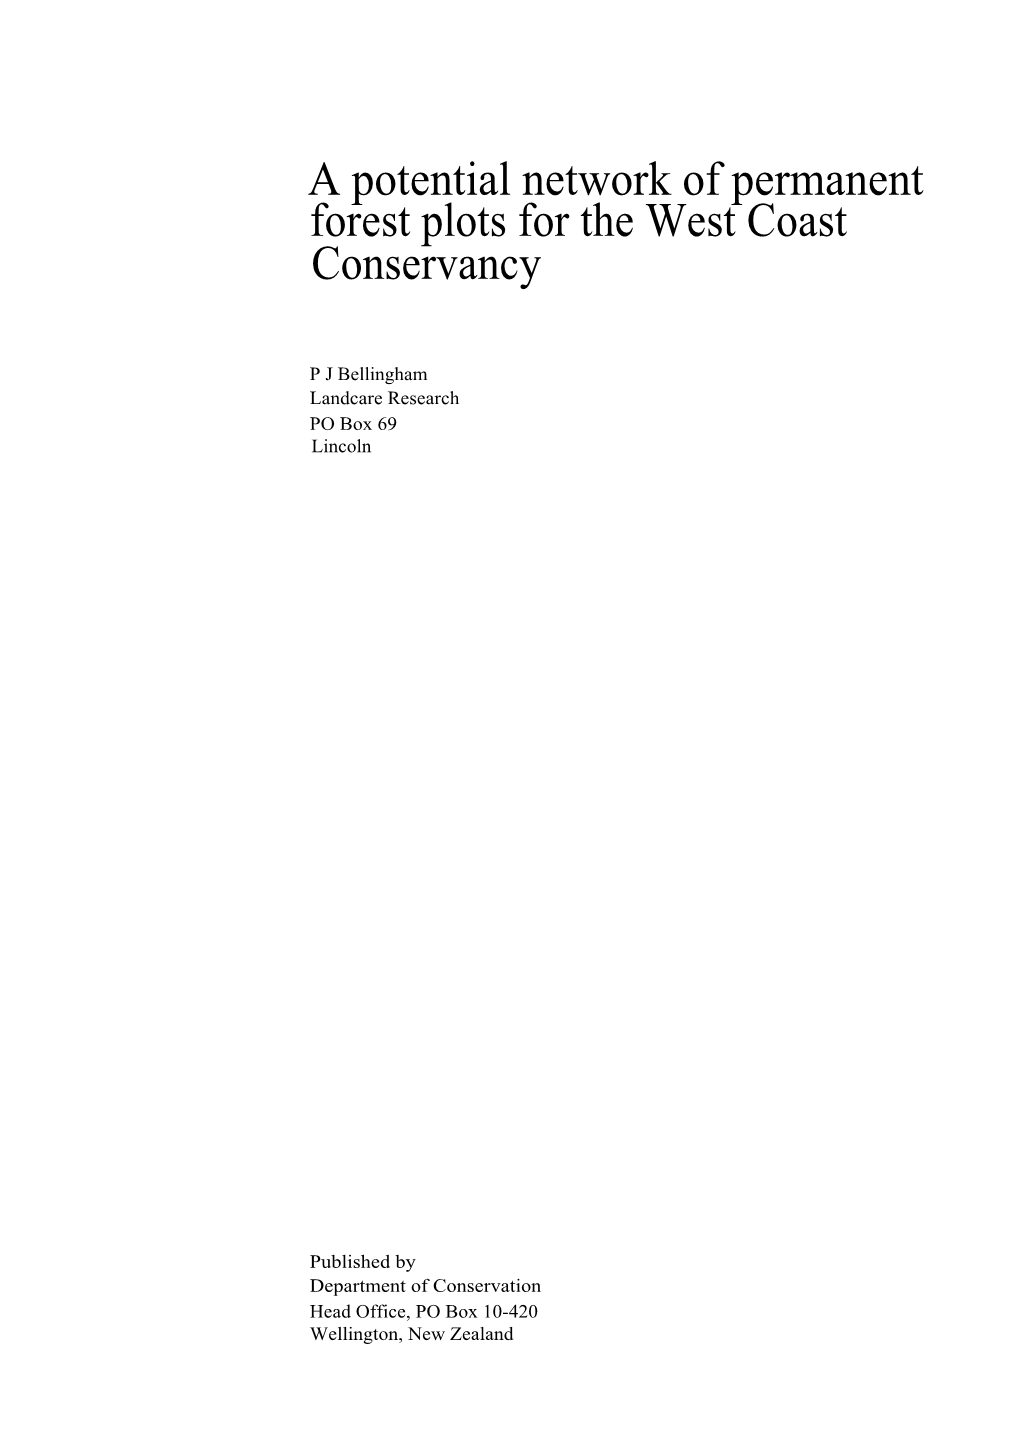 A Potential Network of Permanent Forest Plots for the West Coast Conservancy